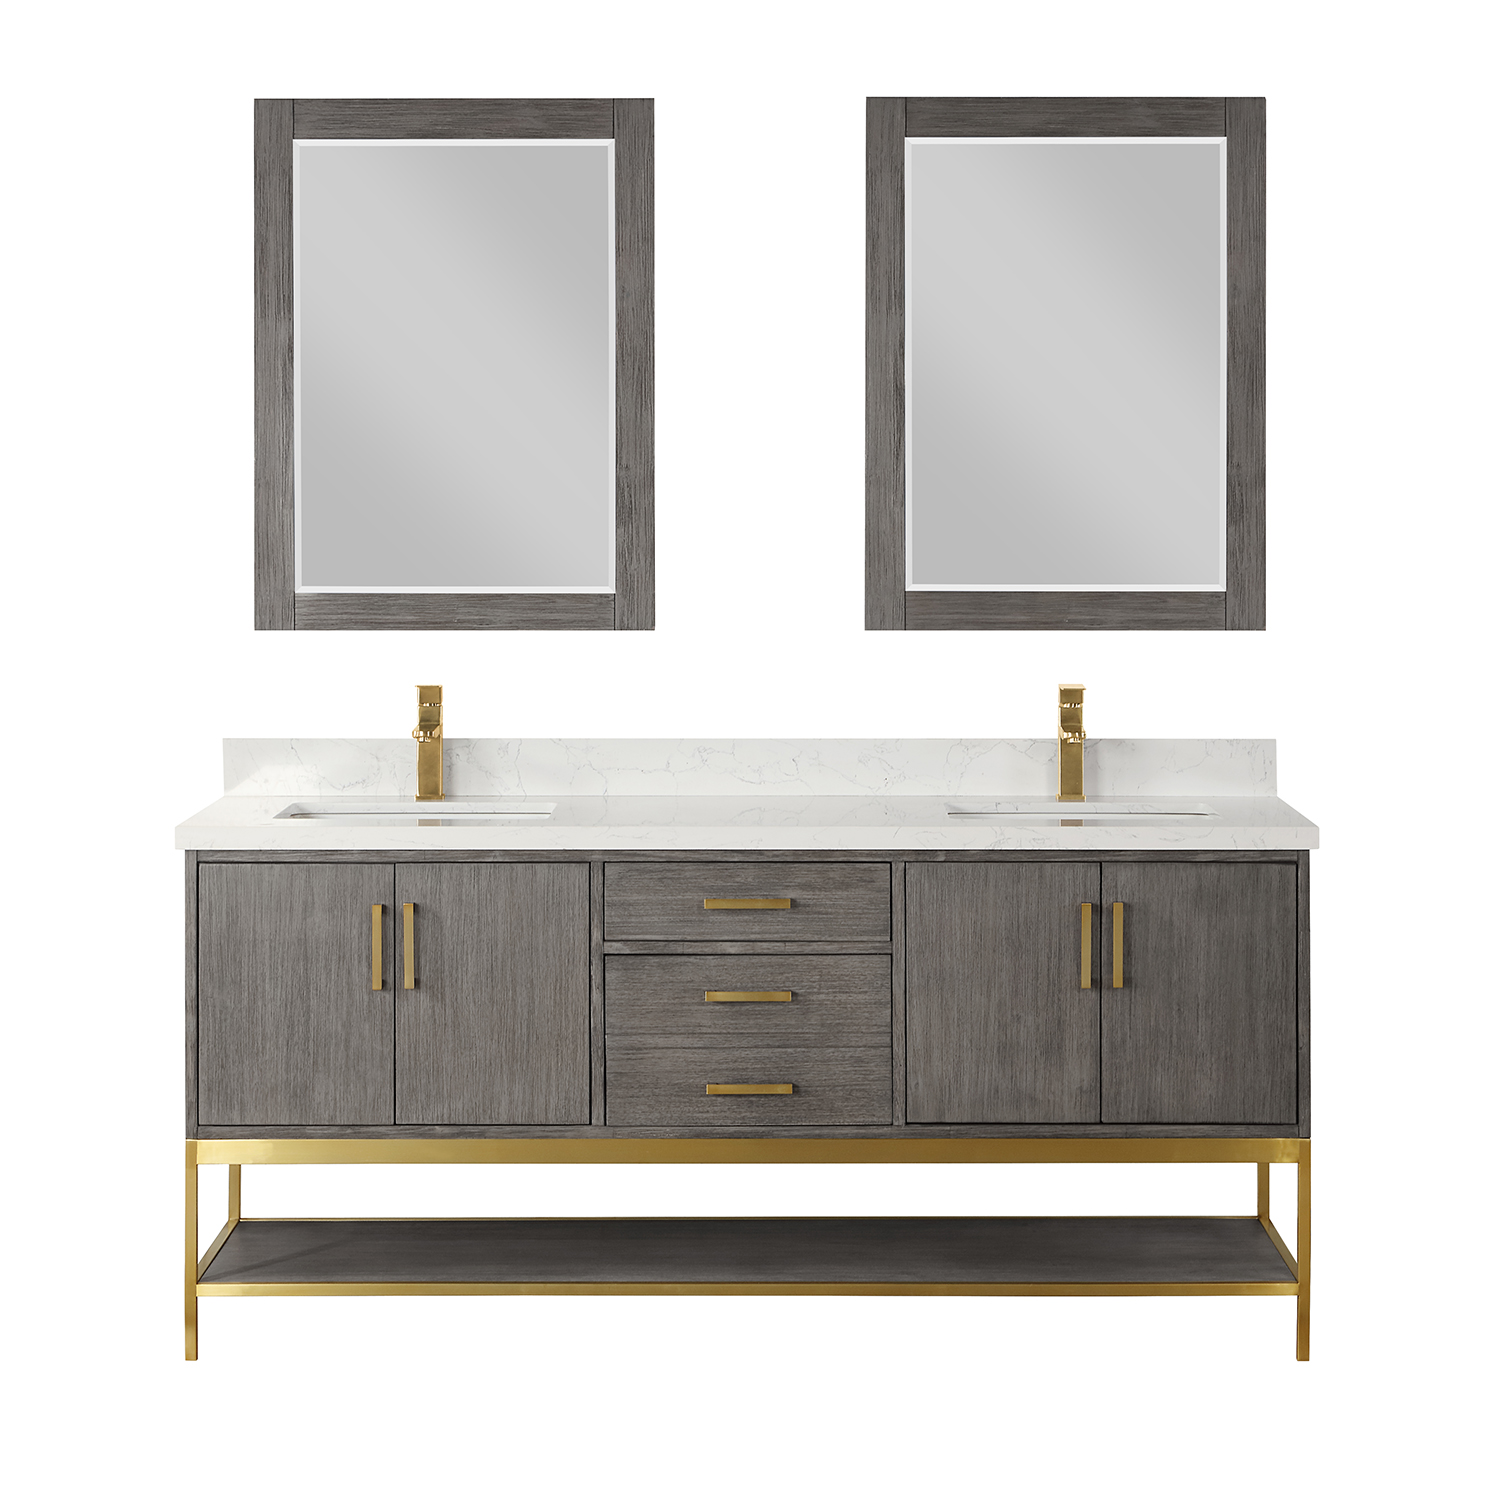 Issac Edwards Collection 72" Double Bathroom Vanity Set in Classical Grey with Grain White Composite Stone Countertop with Mirror 